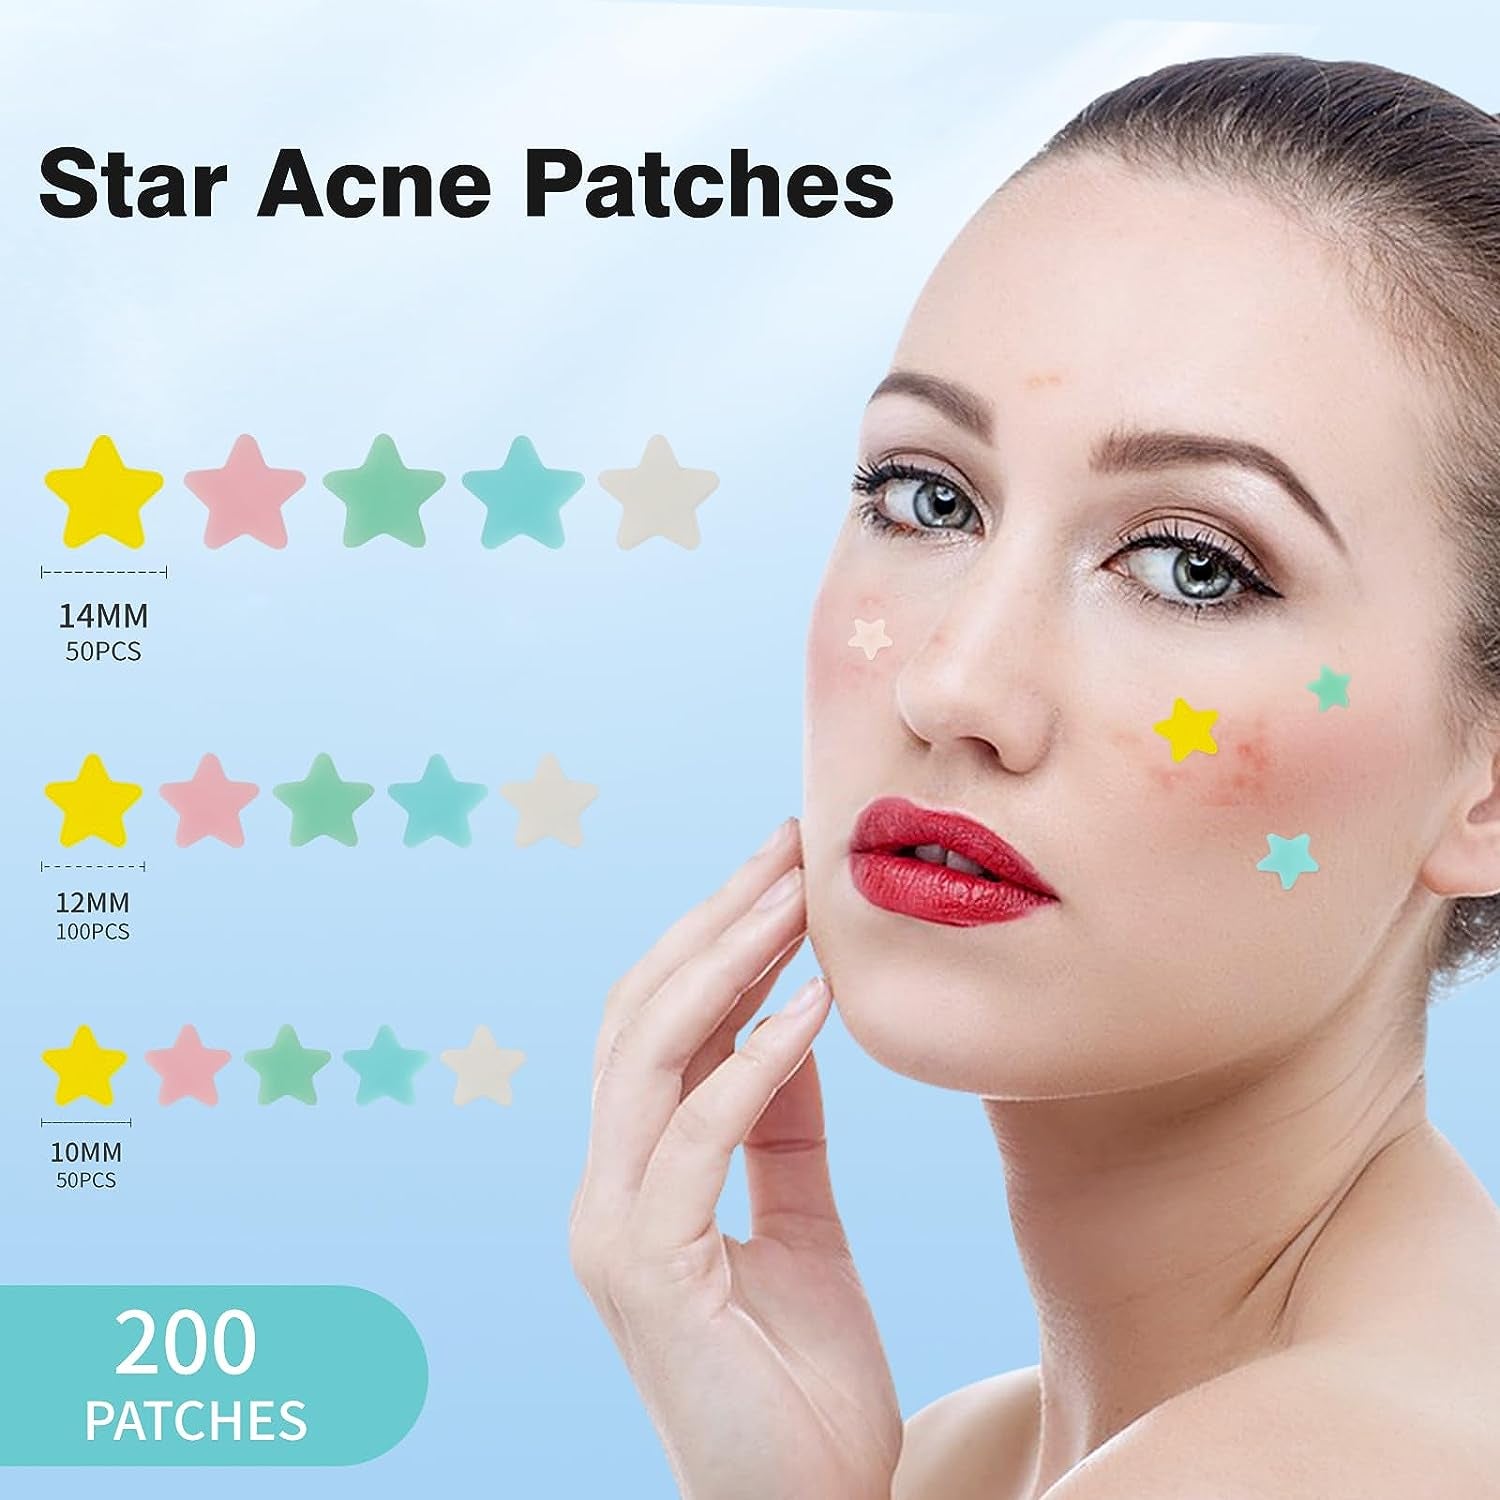 Pimple Patches for Face, Hydrocolloid Acne Patches, Cute Star Zit Covers